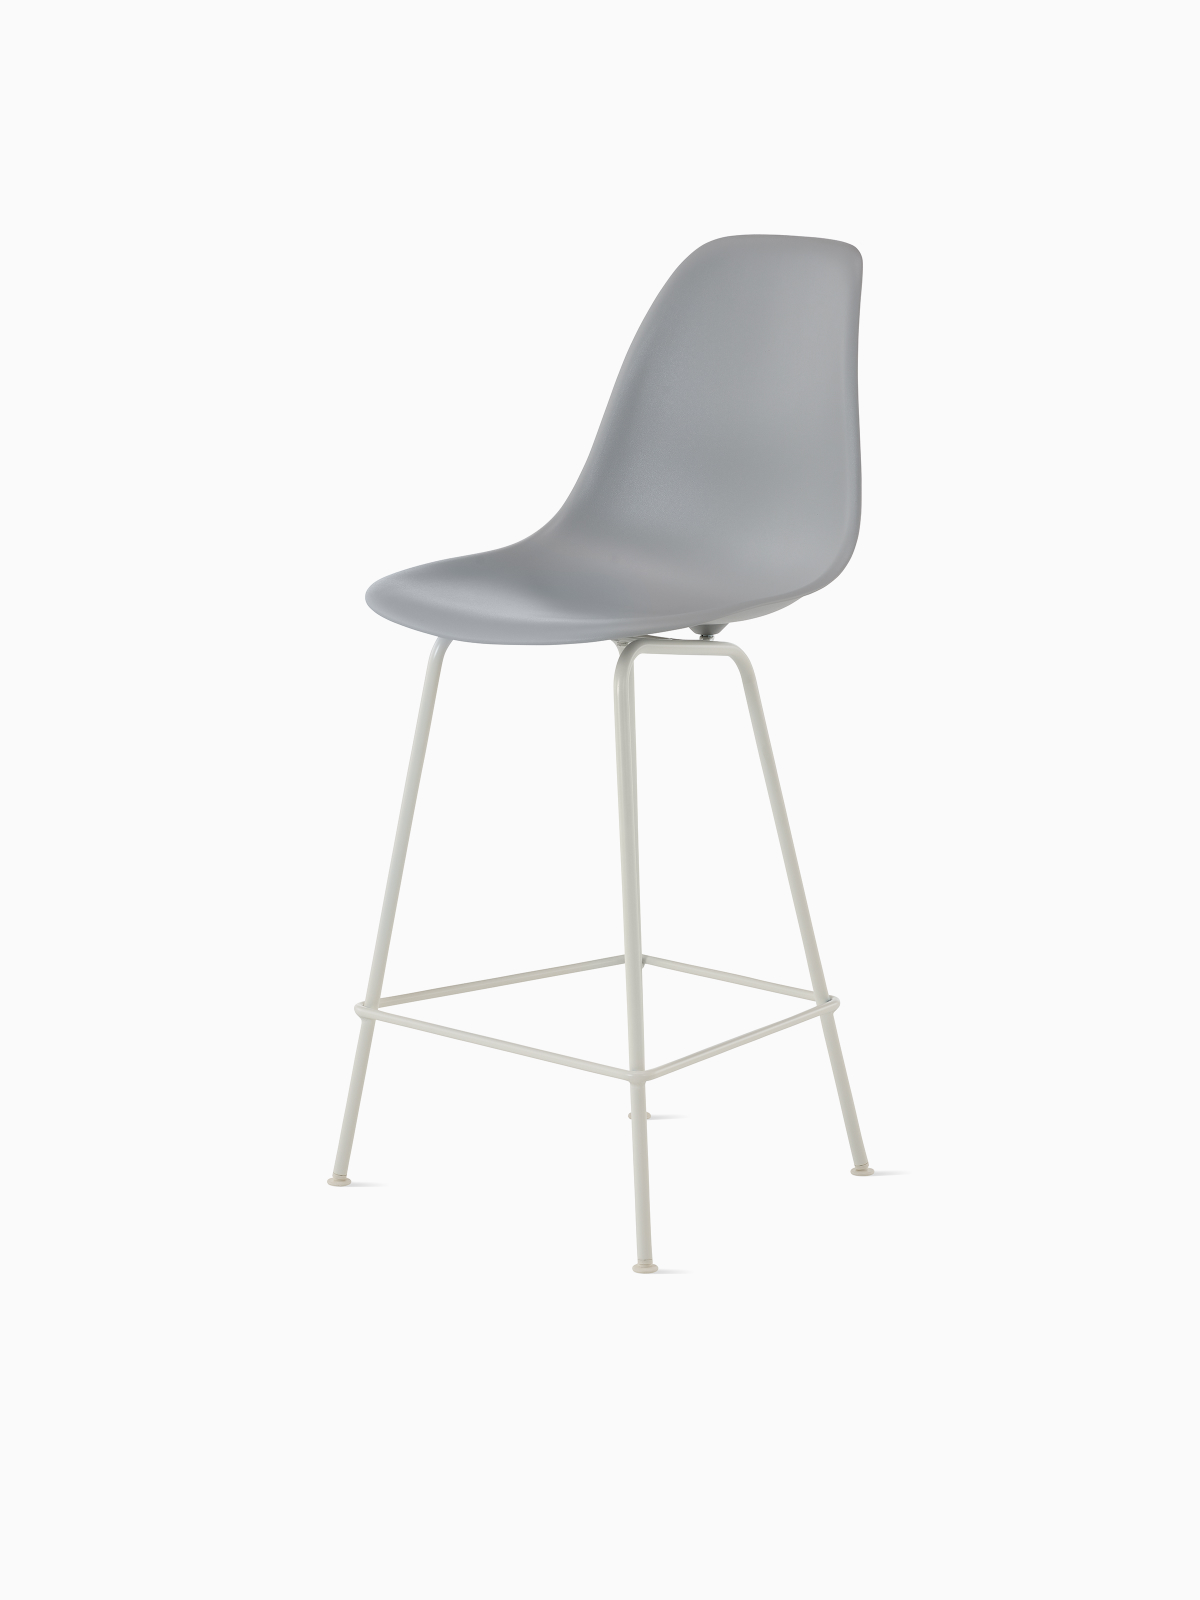 Eames Moulded Plastic Stool